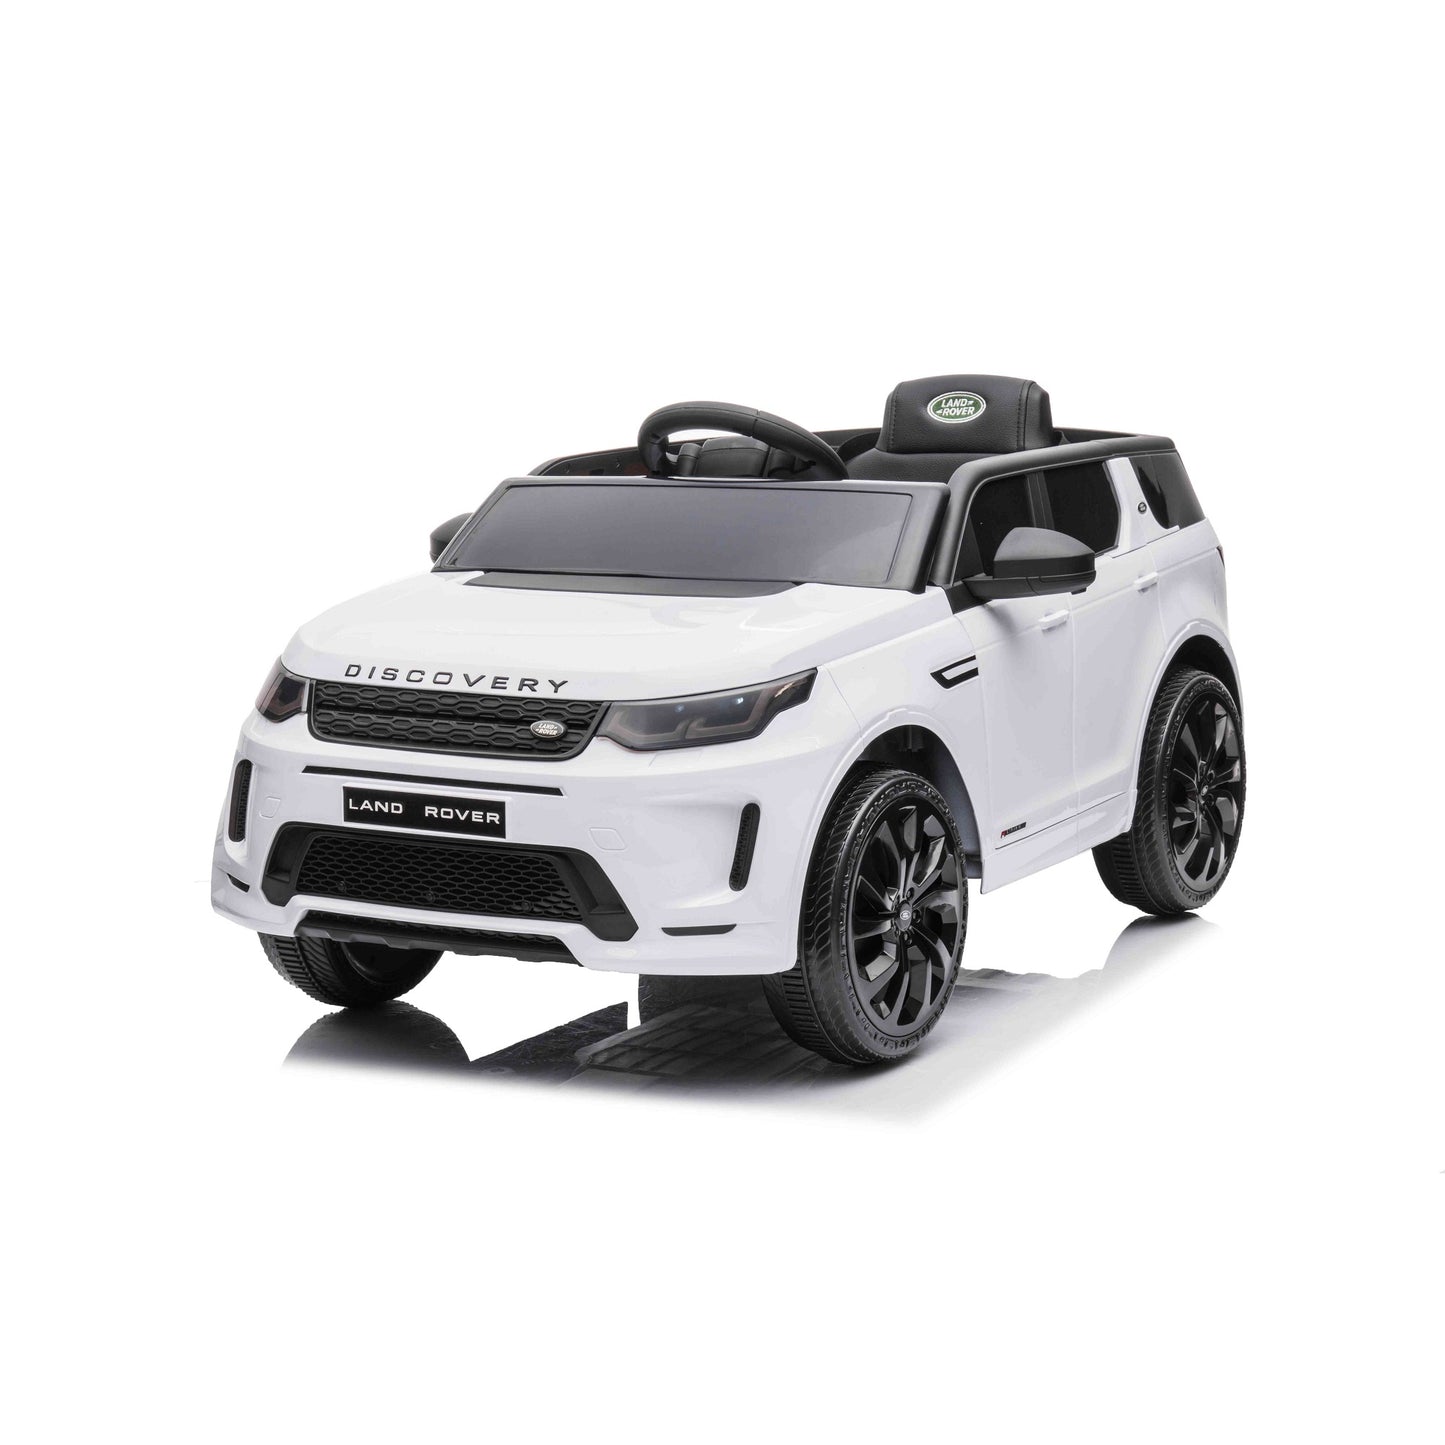 Licensed Range Discovery Sport 12v Kids Ride on Car with Remote - White